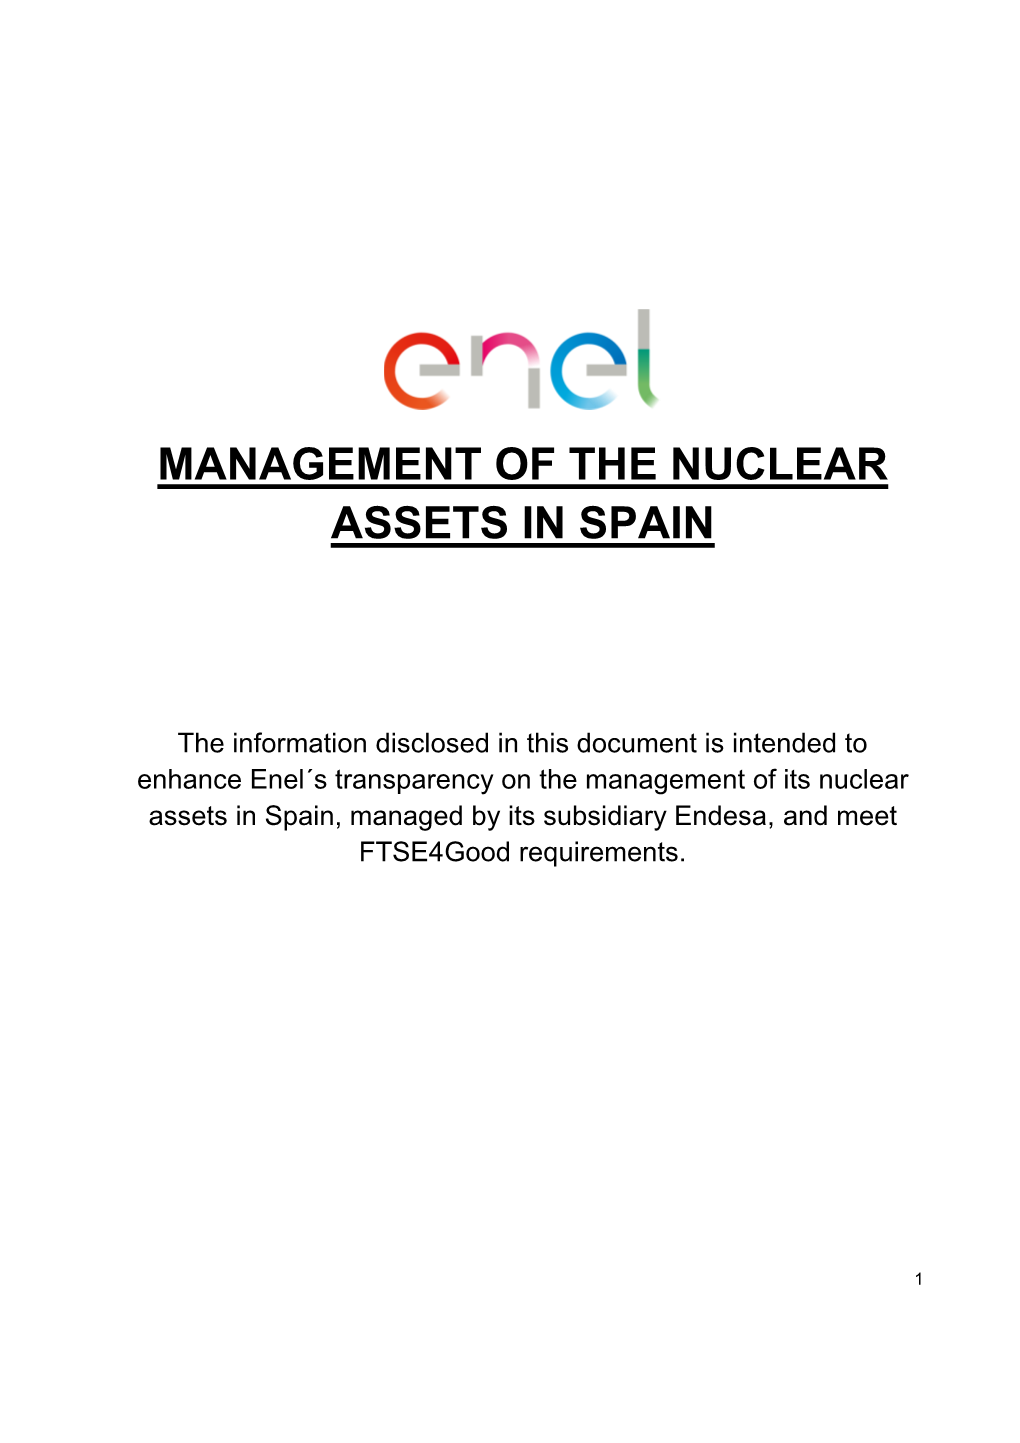 Management of the Nuclear Assets in Spain